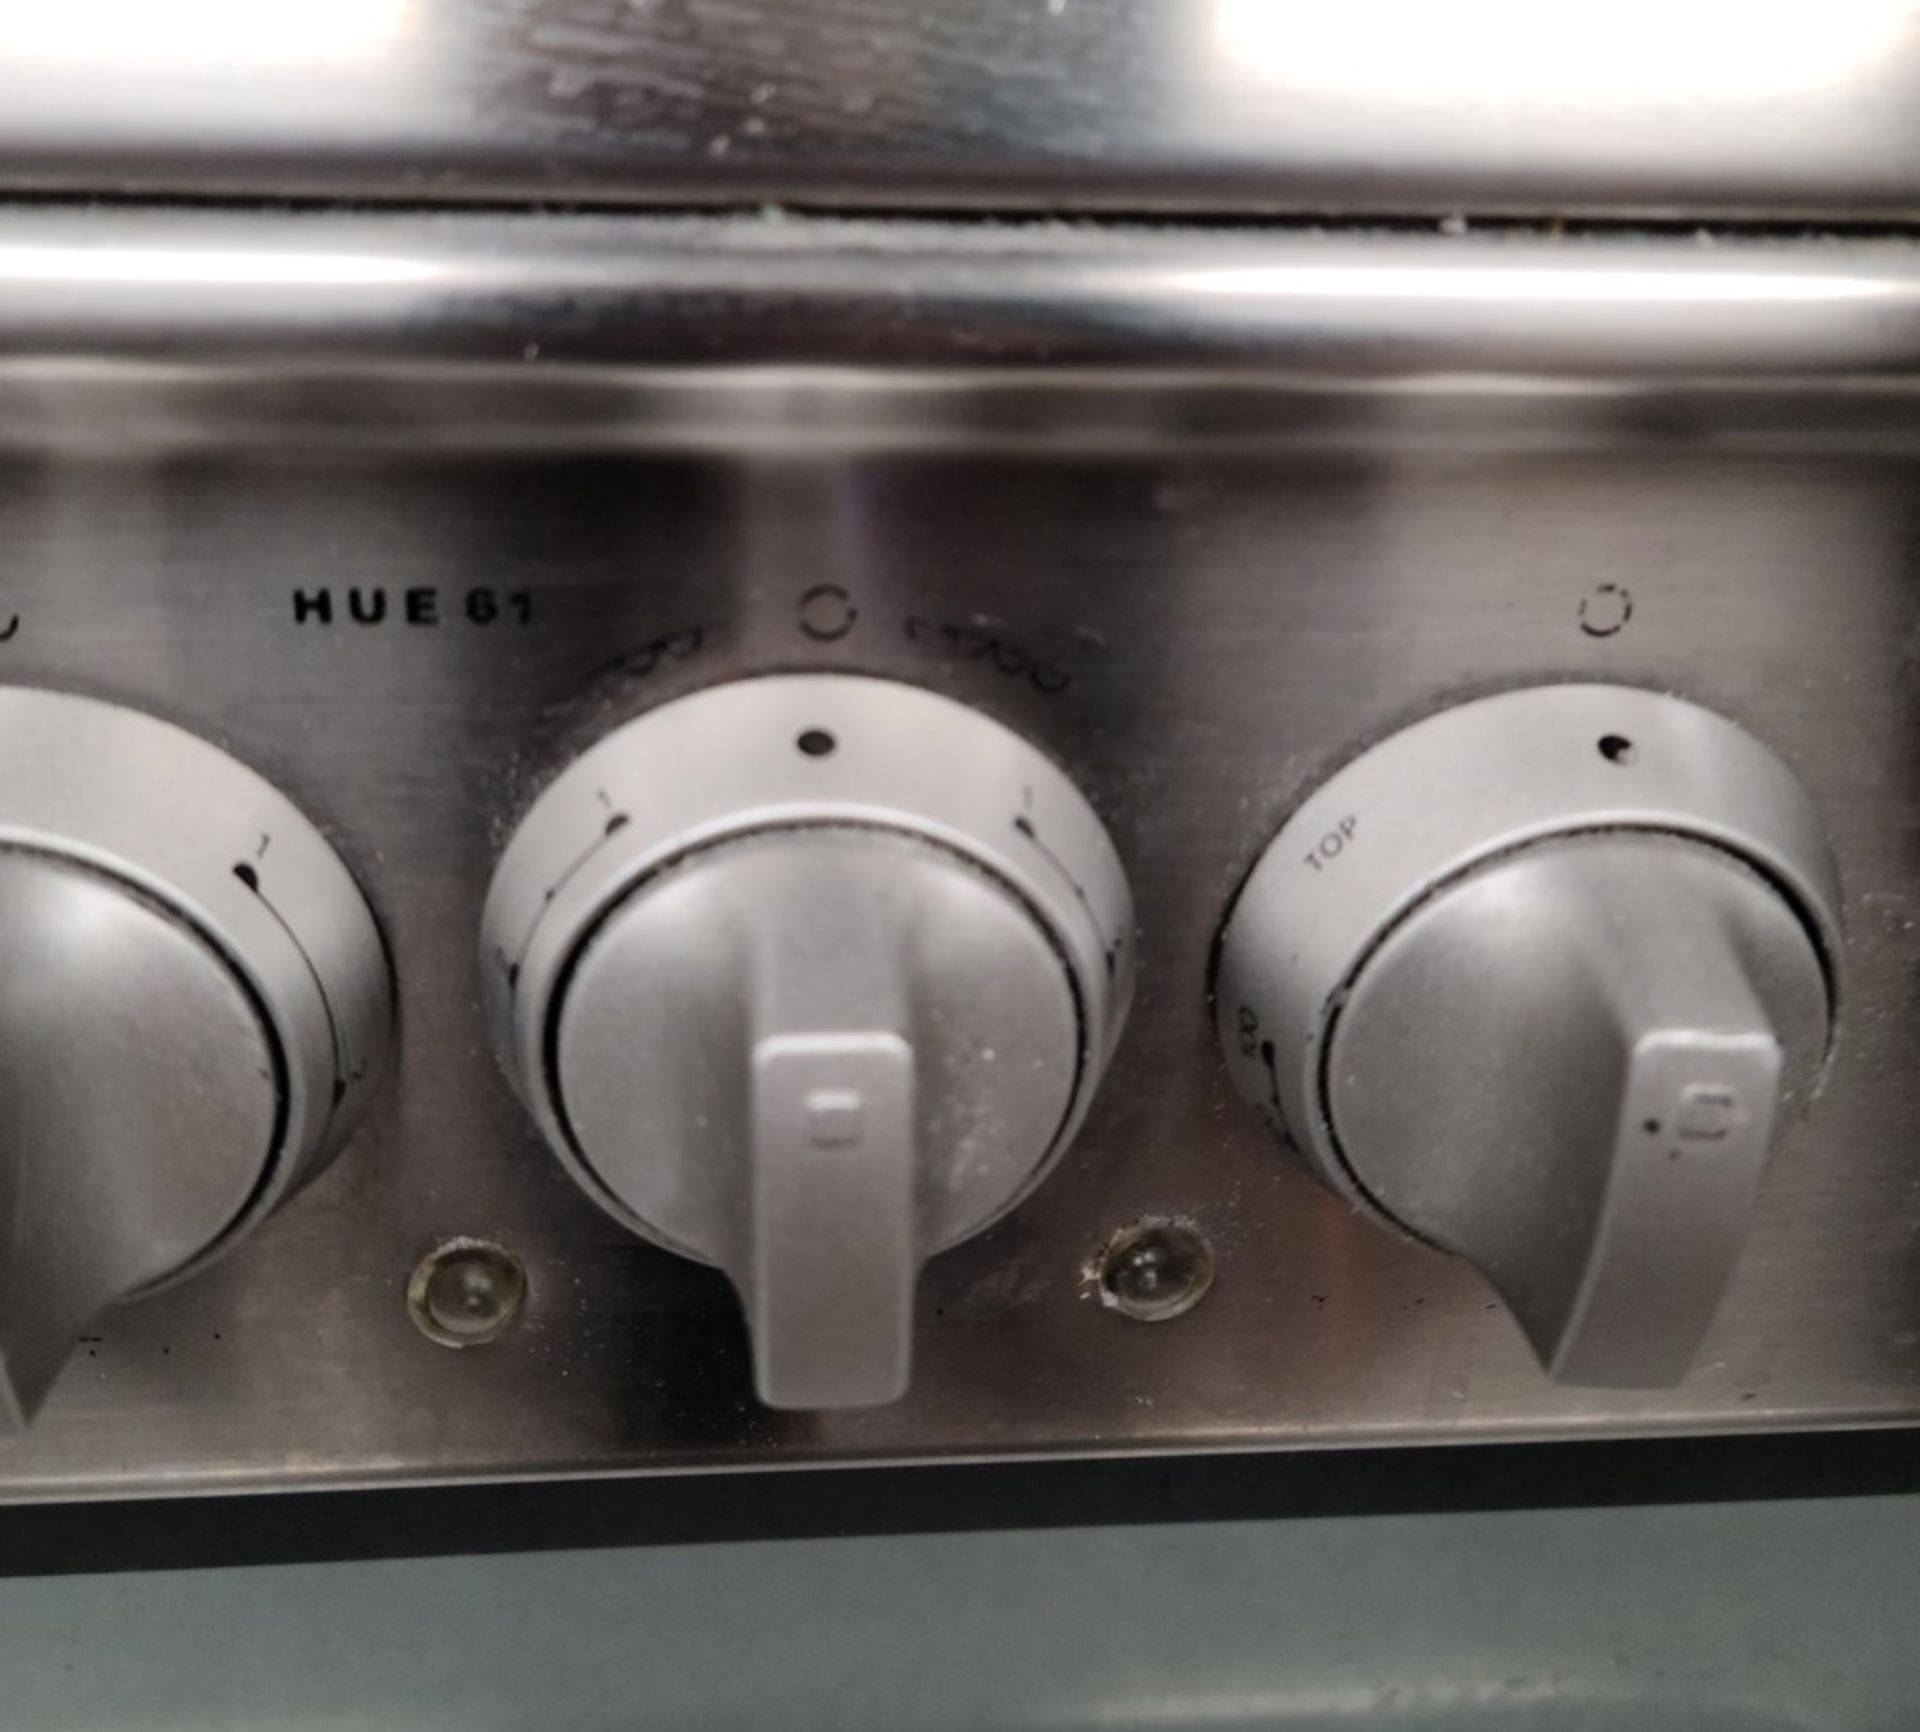 1 x Hotpoint HUI611X Electric Cooker With Double Oven, Four Burner Hob and Stainless Steel Finish - Image 7 of 9